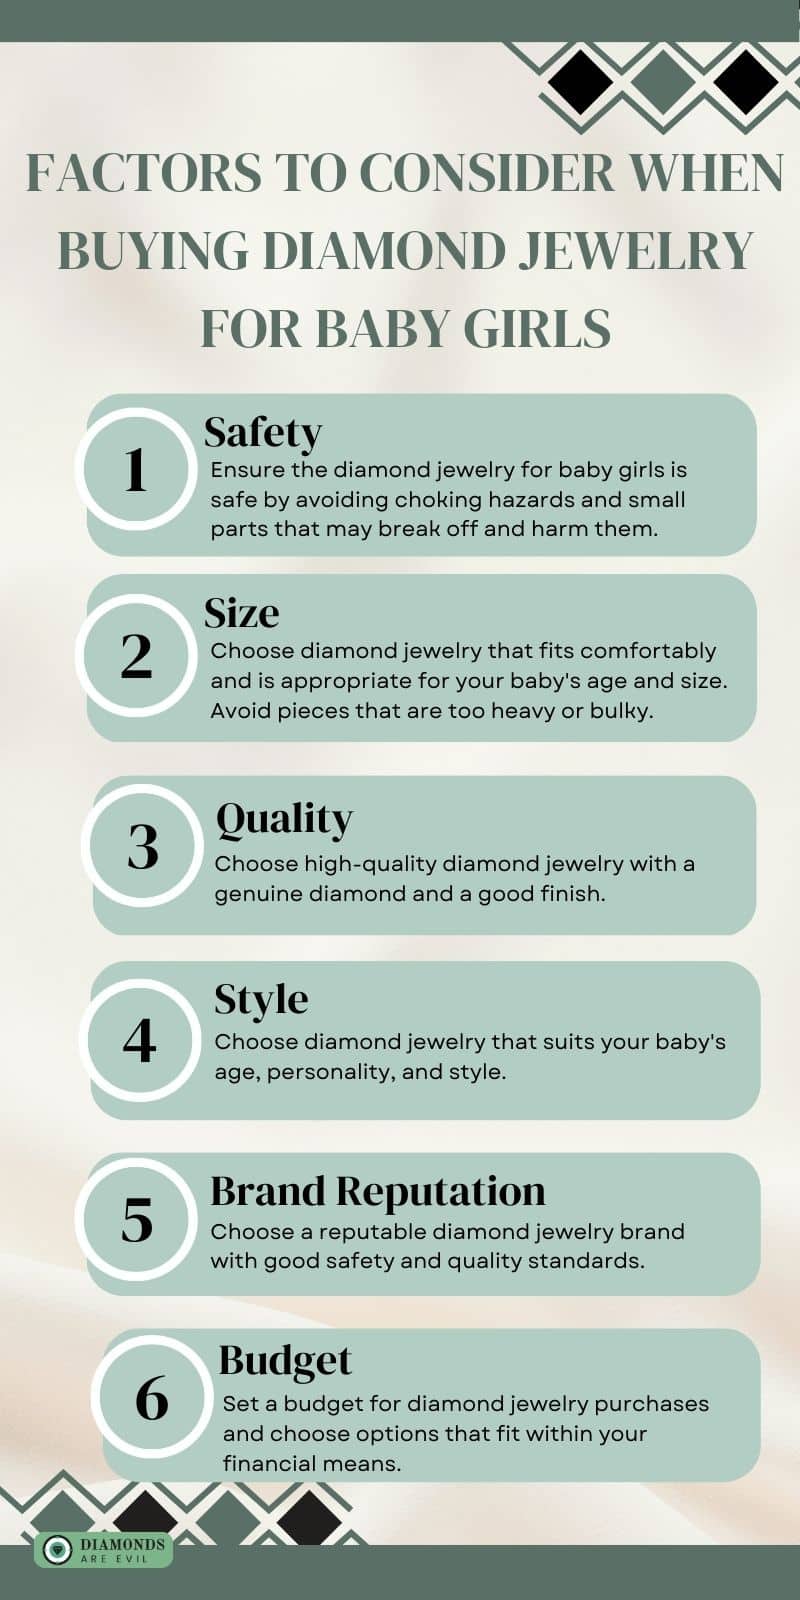 Factors to Consider When Buying Diamond Jewelry for Baby Girls(1)